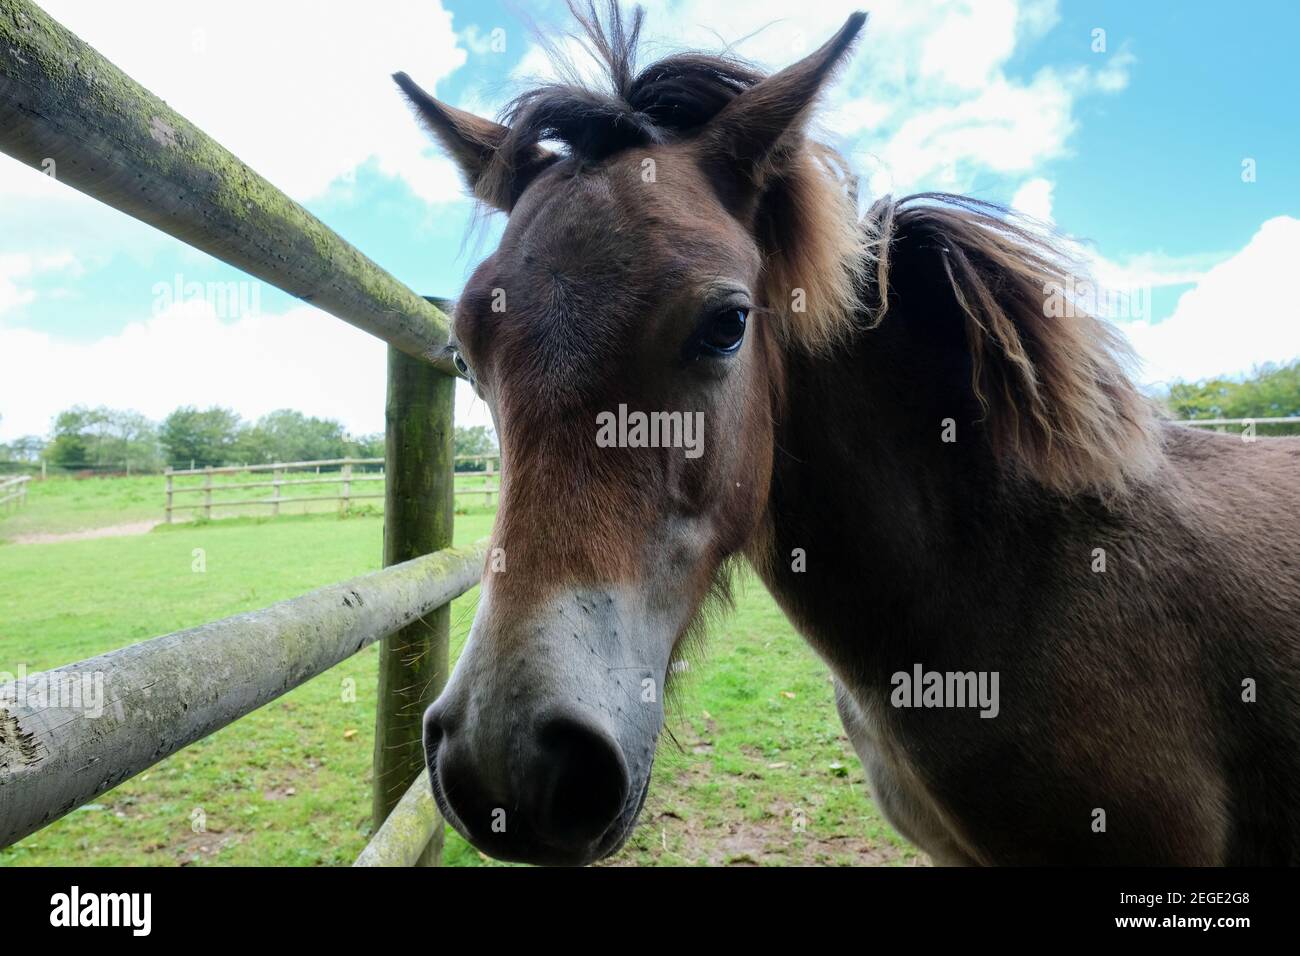 Close shot of a horse in a grassy enclosure with a mixed blue and cloudy sky Stock Photo